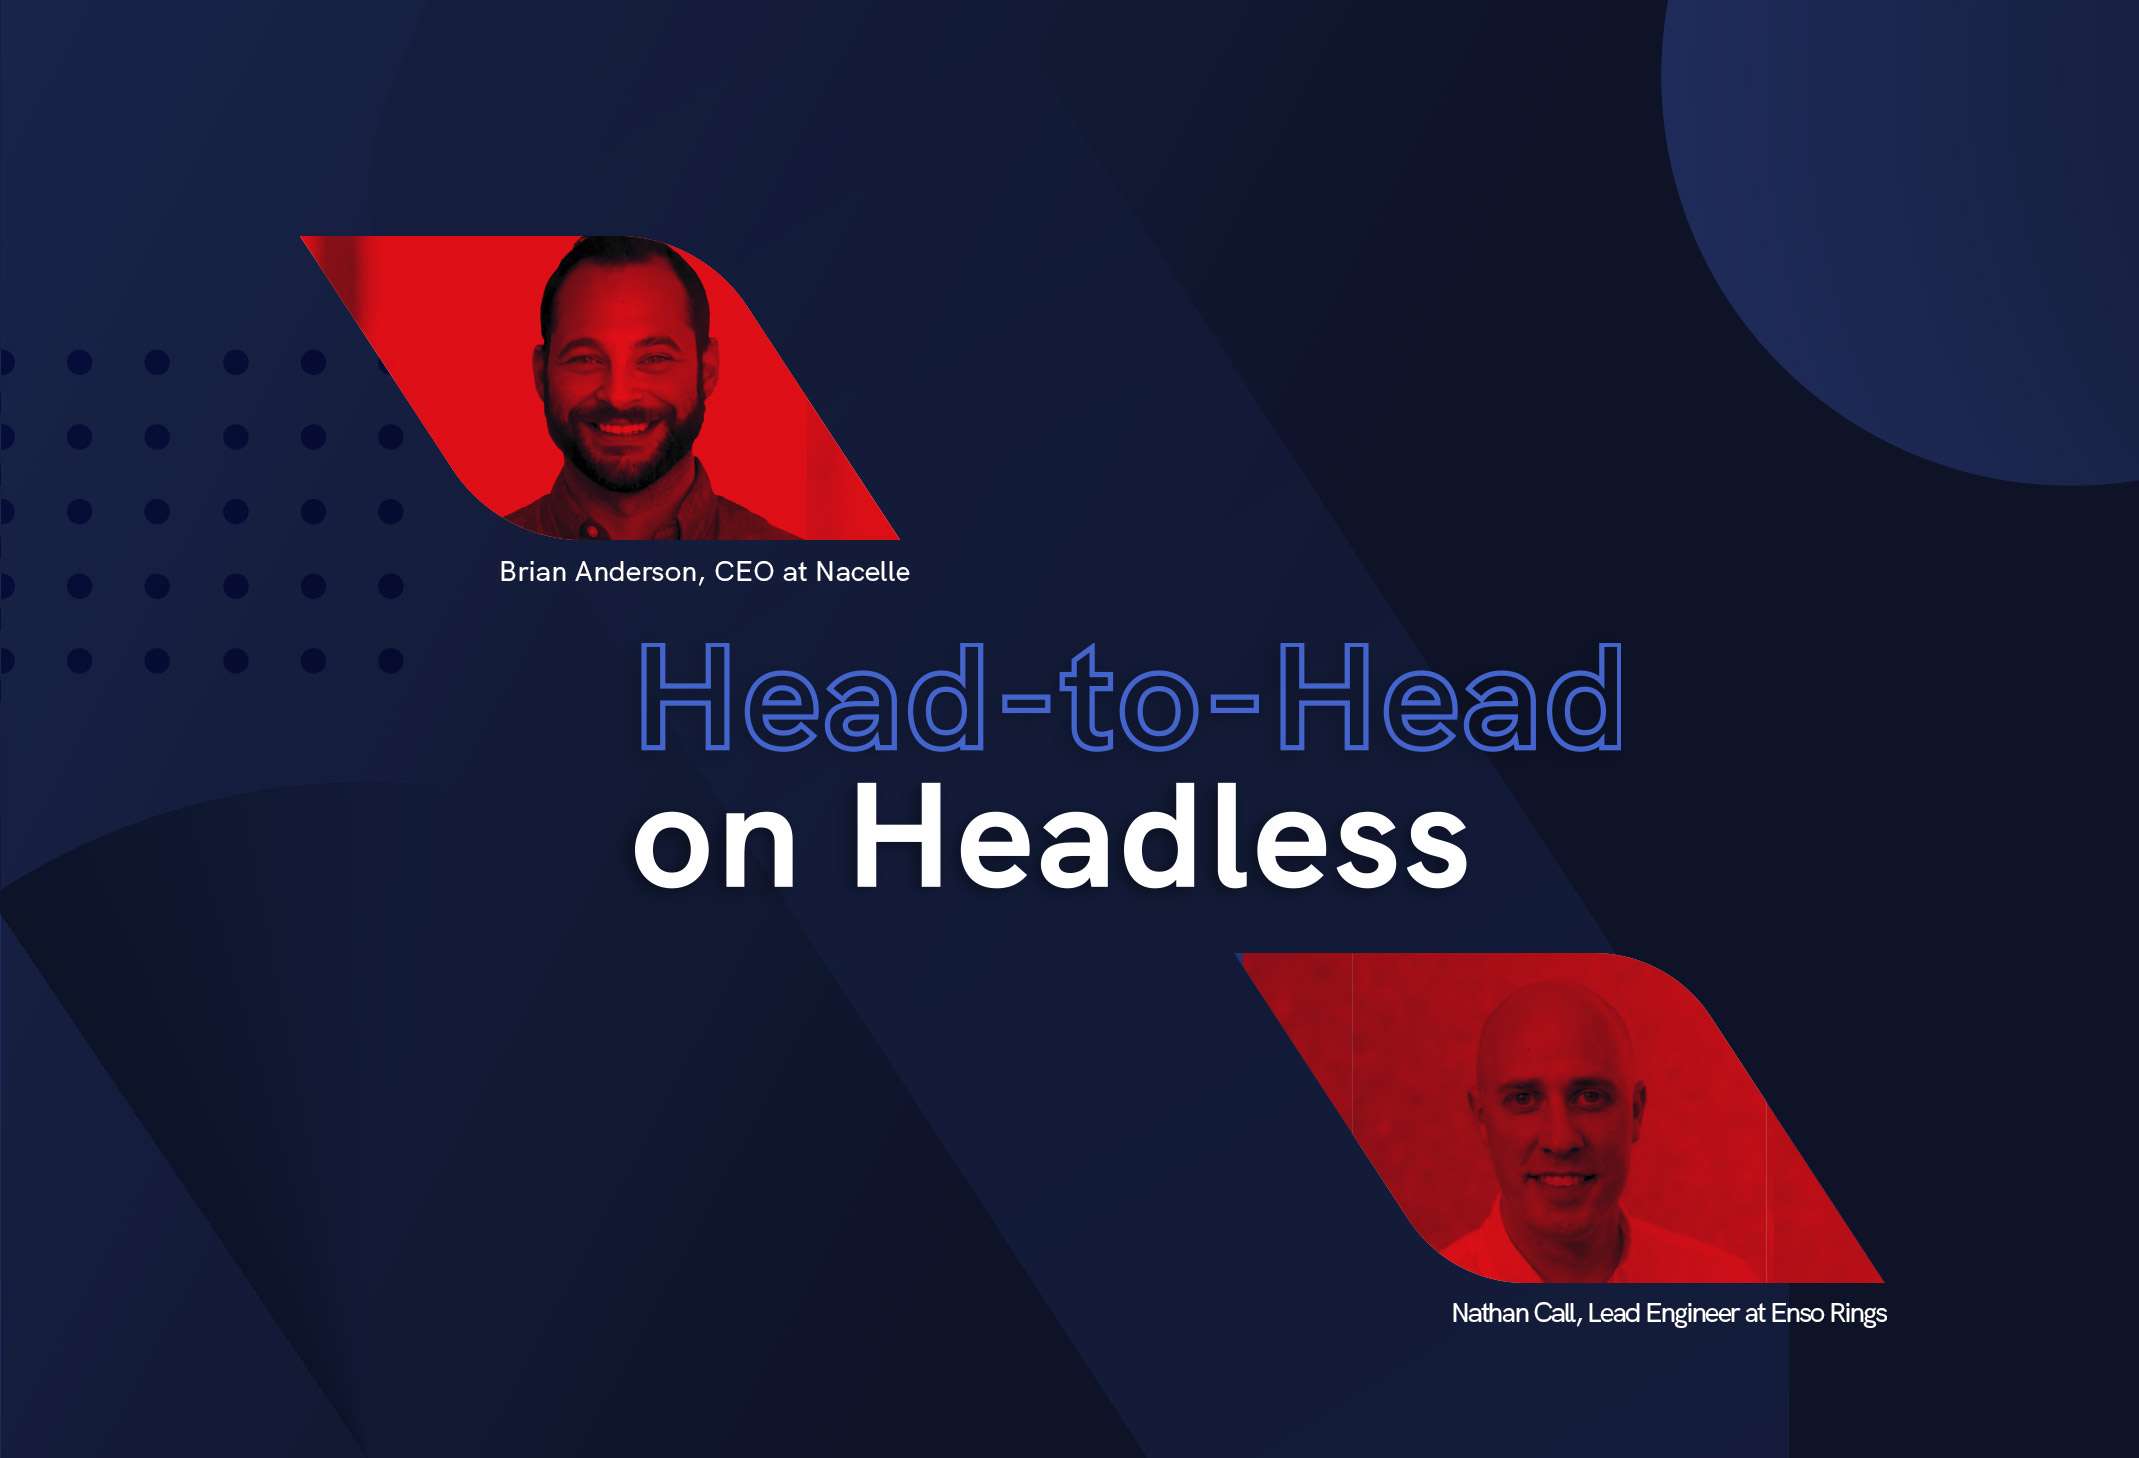  Highlights from head-to-head on Headless with Nathan Call 